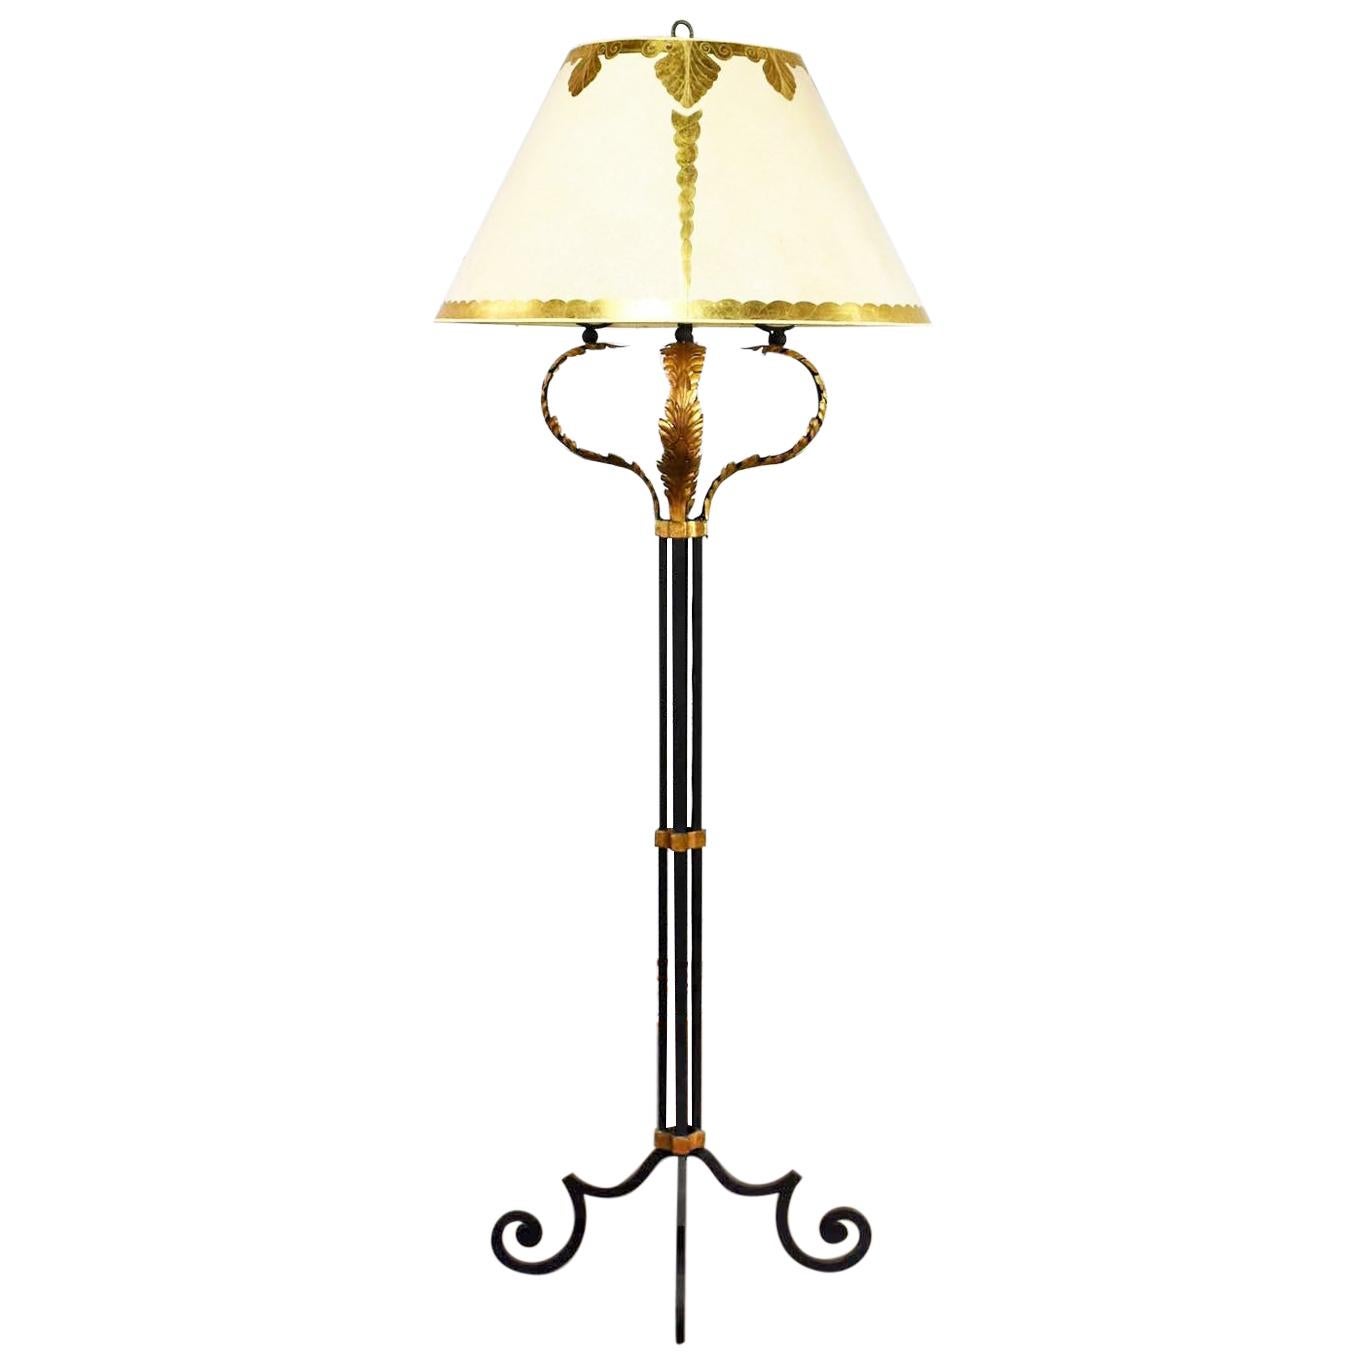 Monumental Neoclassical Iron Floor Lamp Acanthus Leaf Design & Parchment Shade For Sale